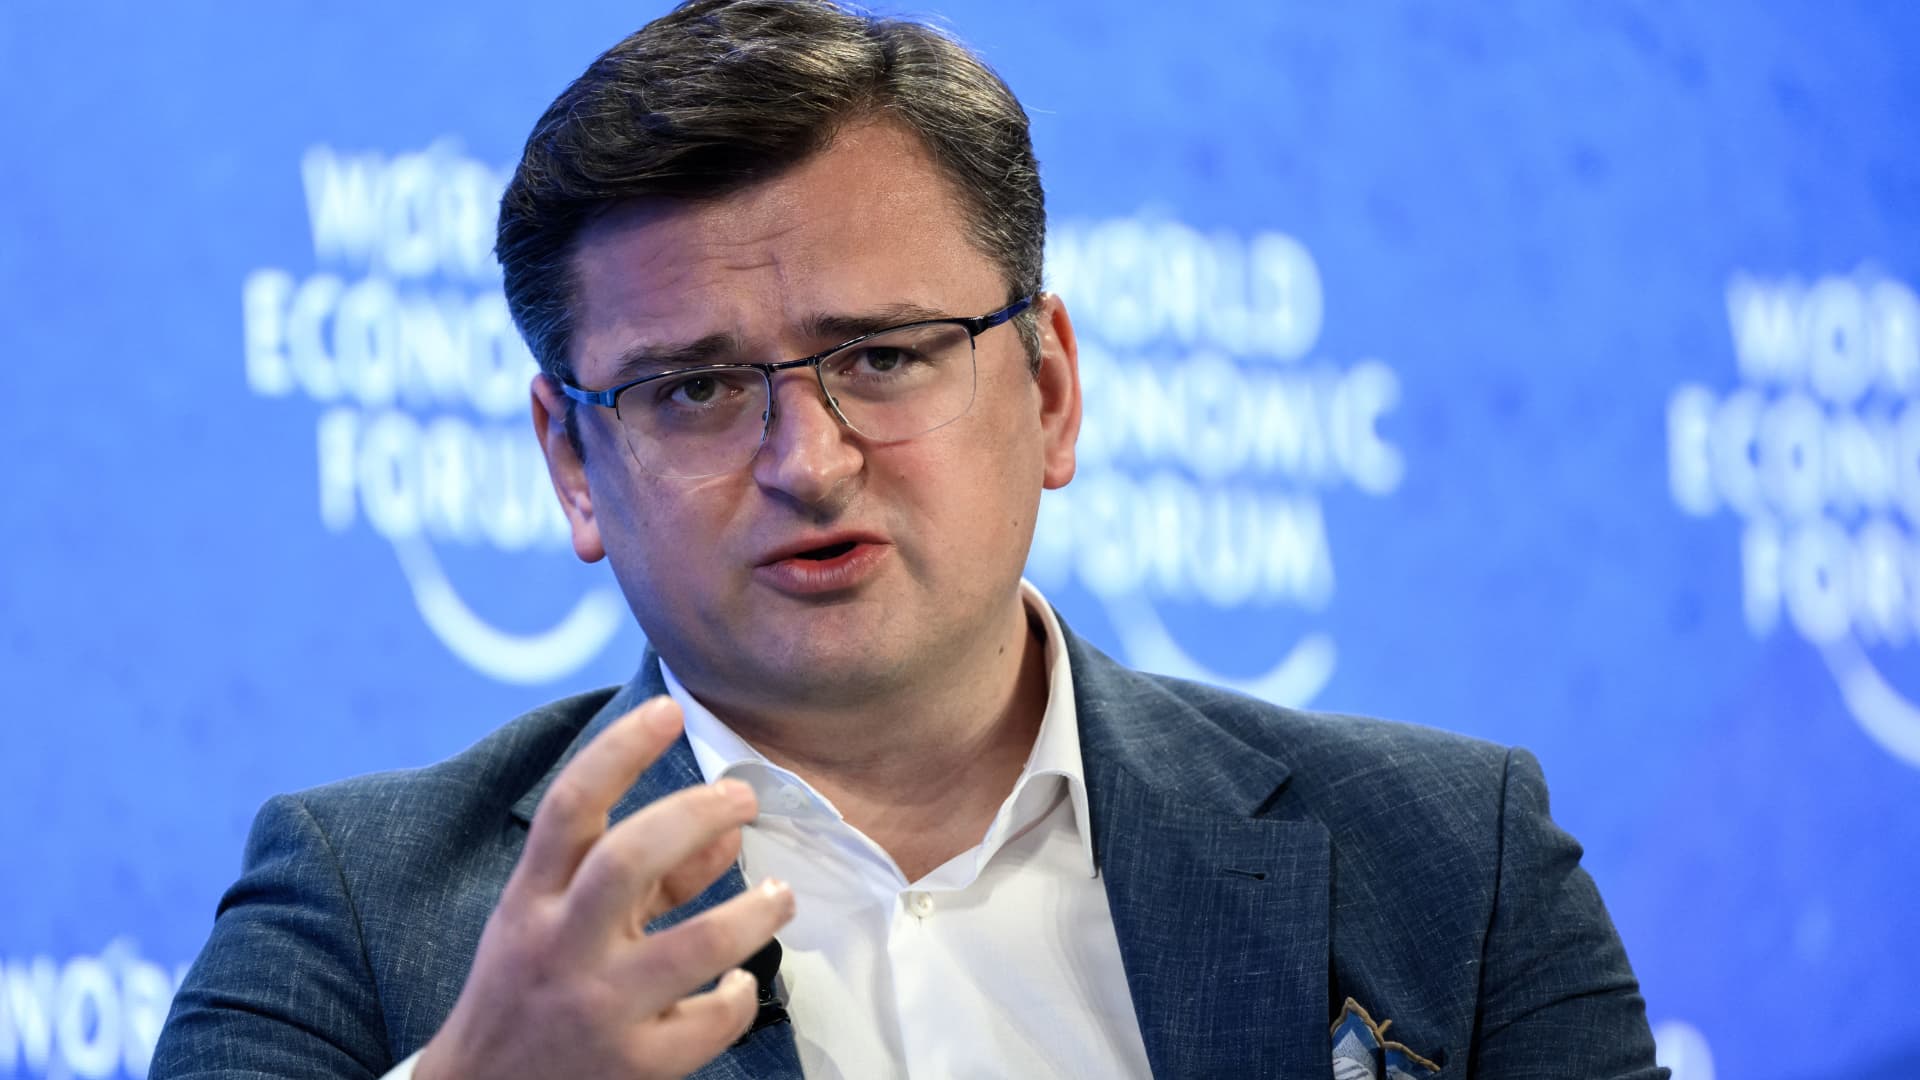 Ukrainian Foreign Minister Dmytro Kuleba gestures during a session at the World Economic Forum (WEF) annual meeting in Davos, on May 25, 2022.